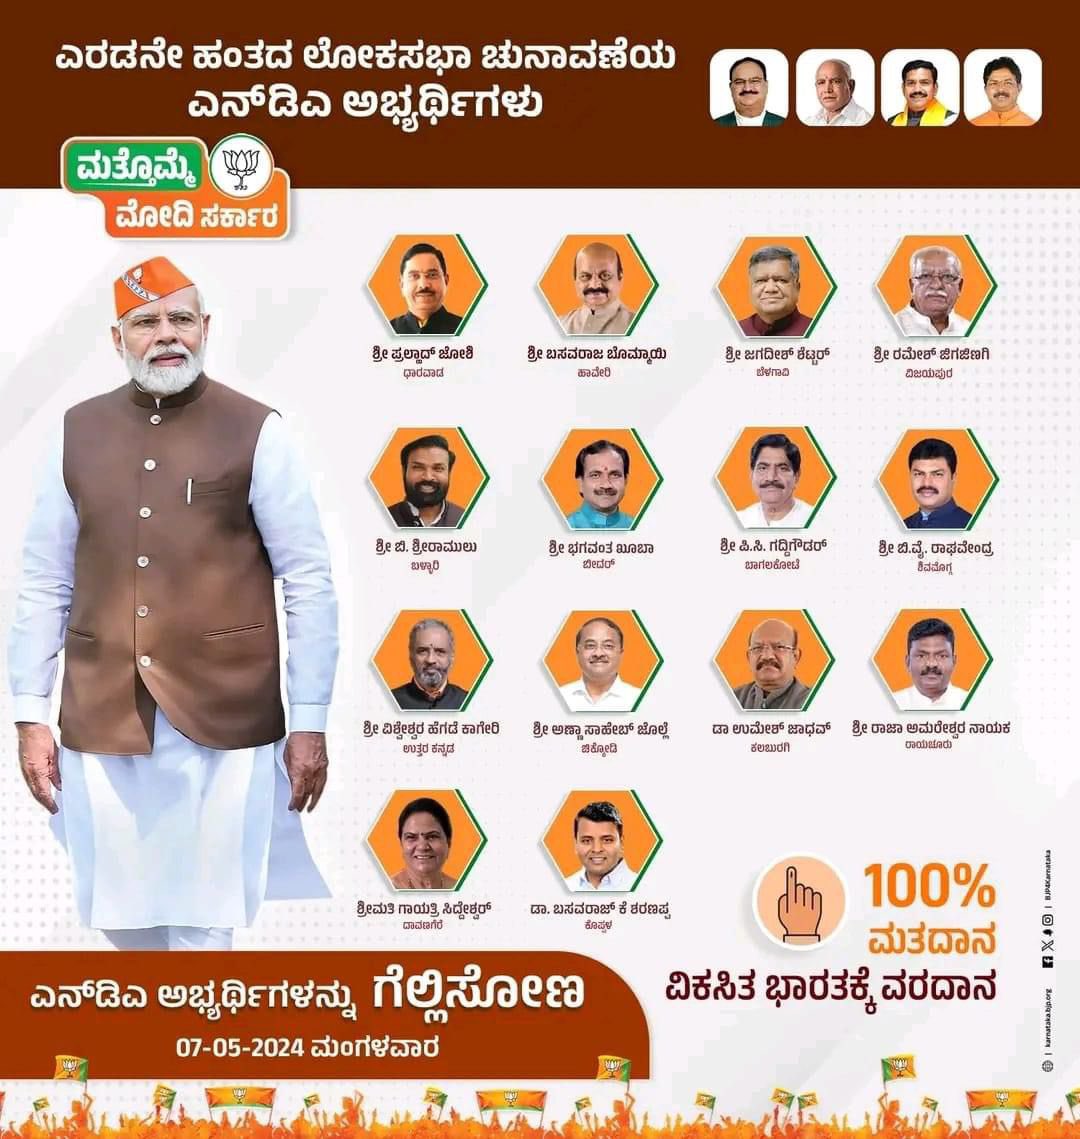 Best wishes to all our @BJP4India candidates as they prepare for the second phase of elections tomorrow. 

May the efforts of all karyakartas bring our PM Shri @narendramodi to power again with a thumping majority for the rise of Bharat in this Amritkaal. 

ಗುರಿ ಒಂದೇ ……